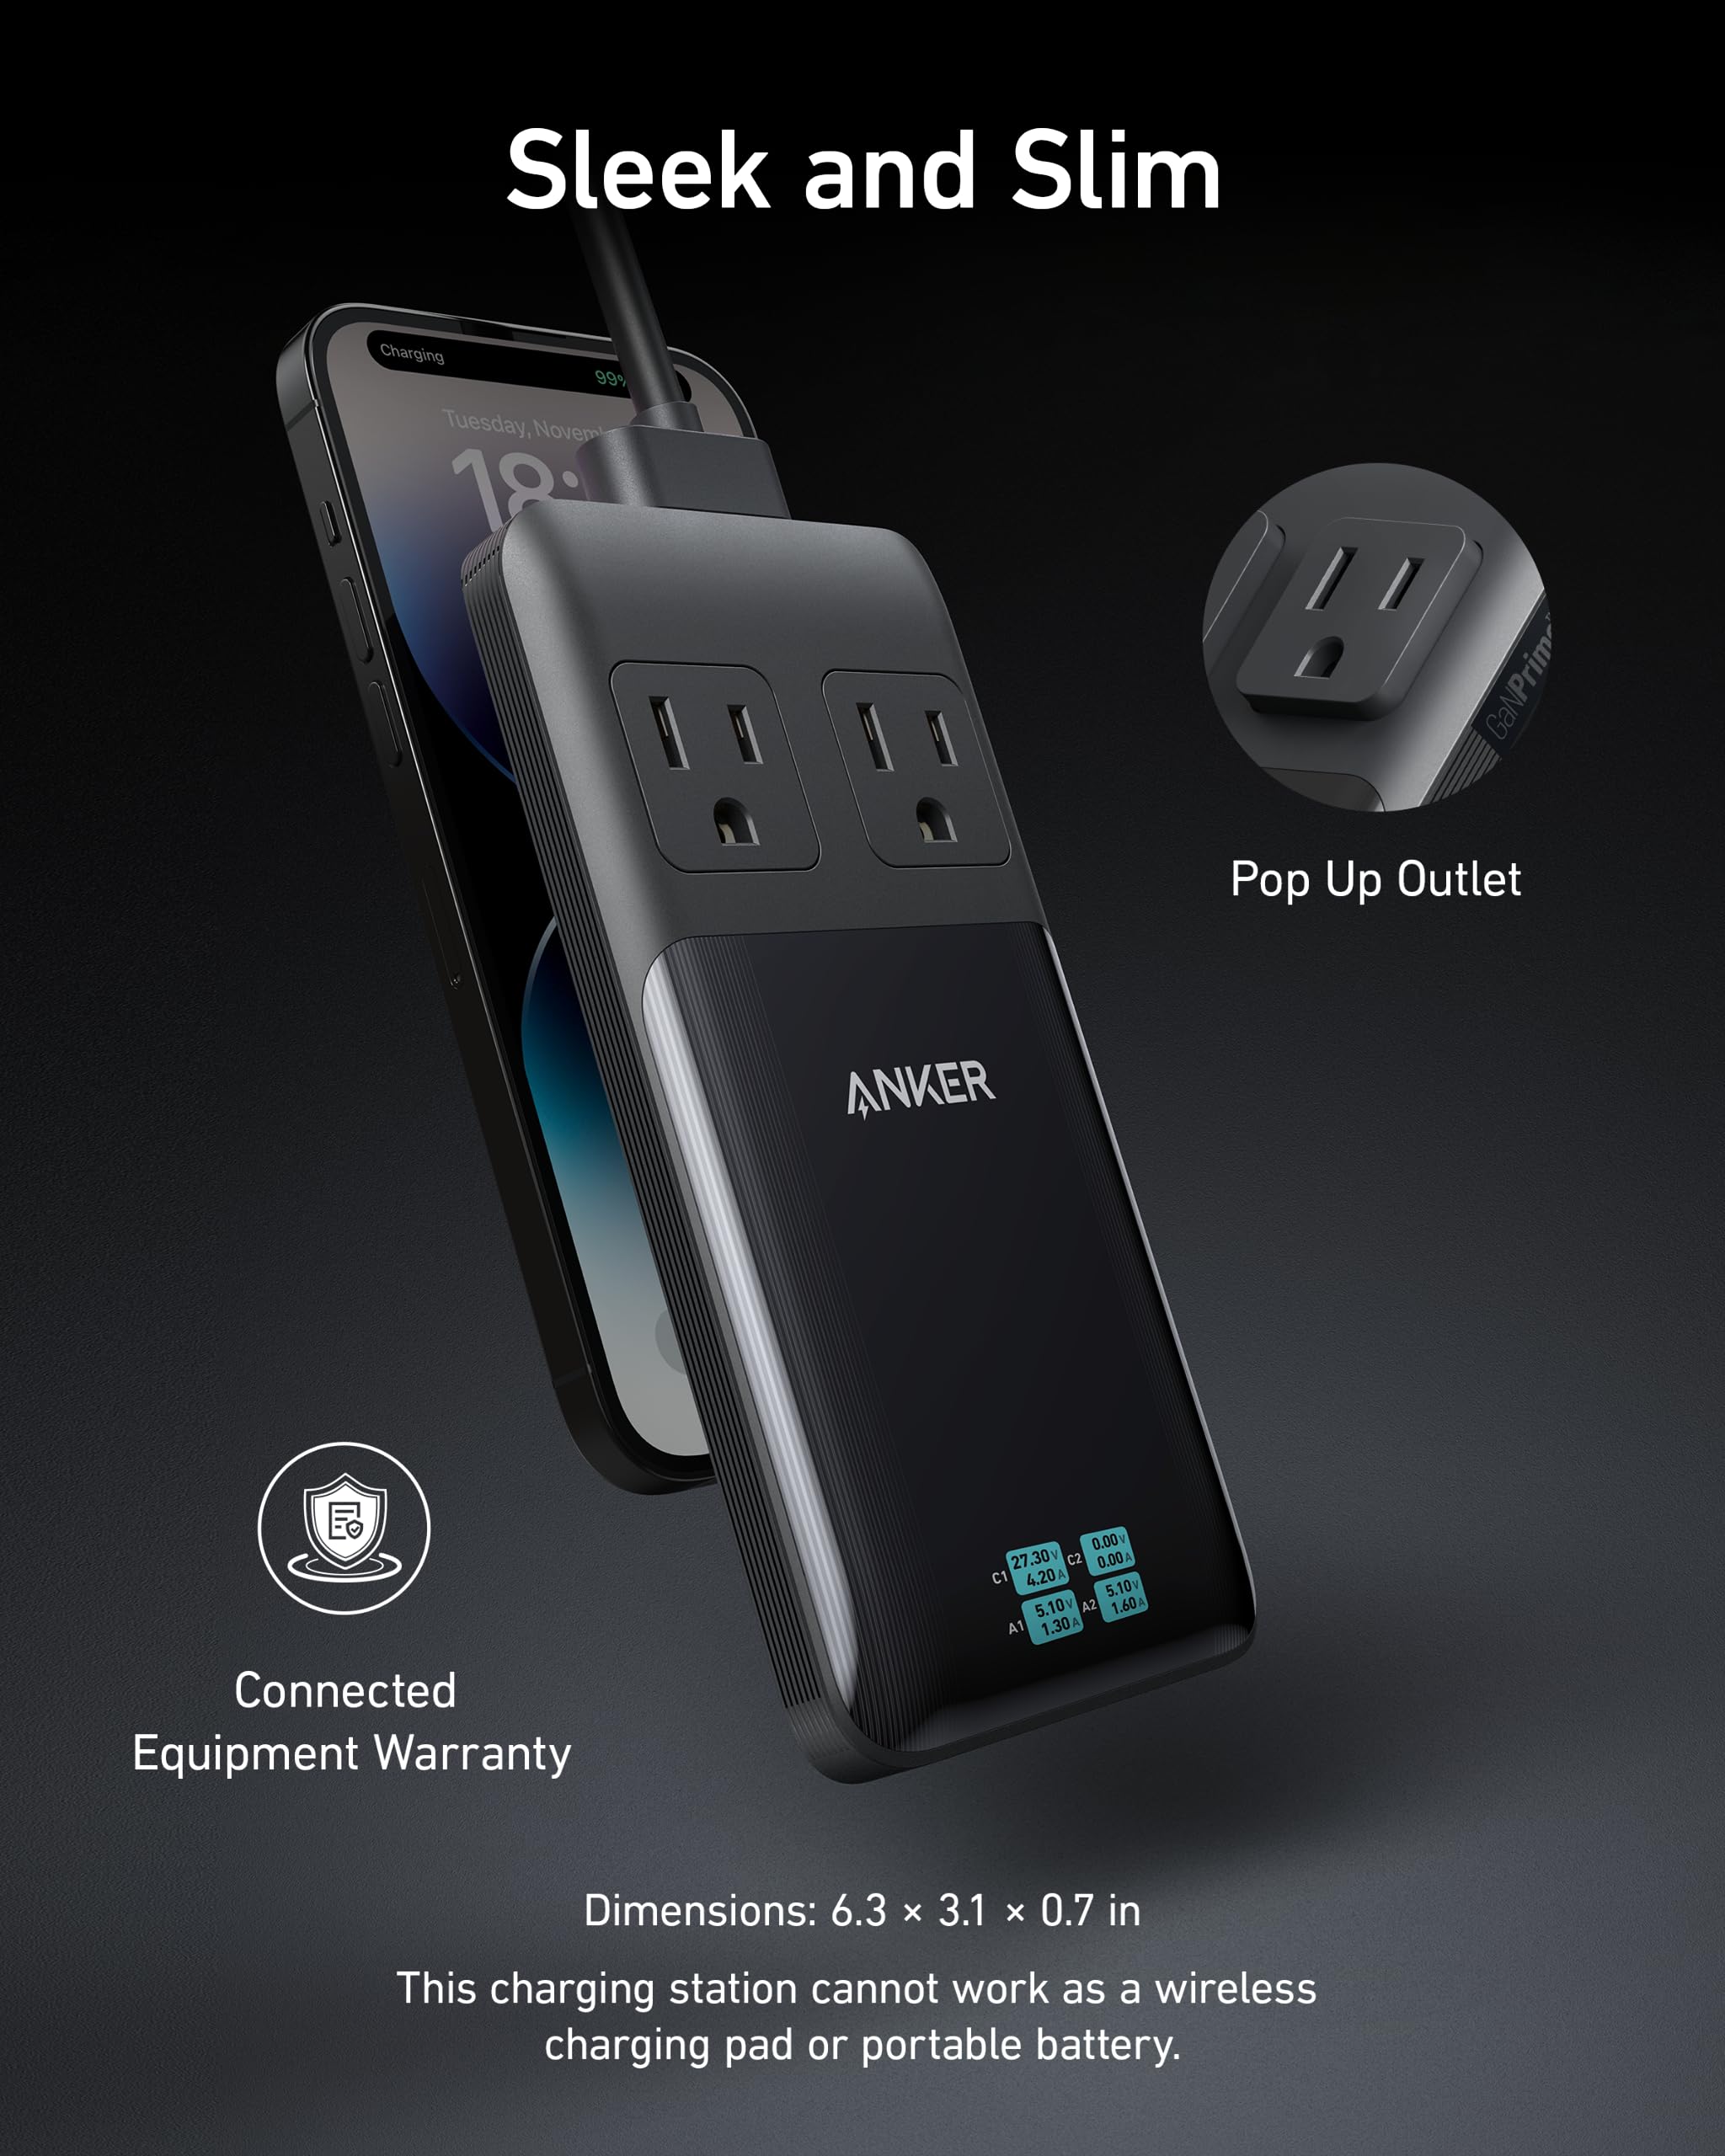 Anker GaNPrime power bank and charging station are capable